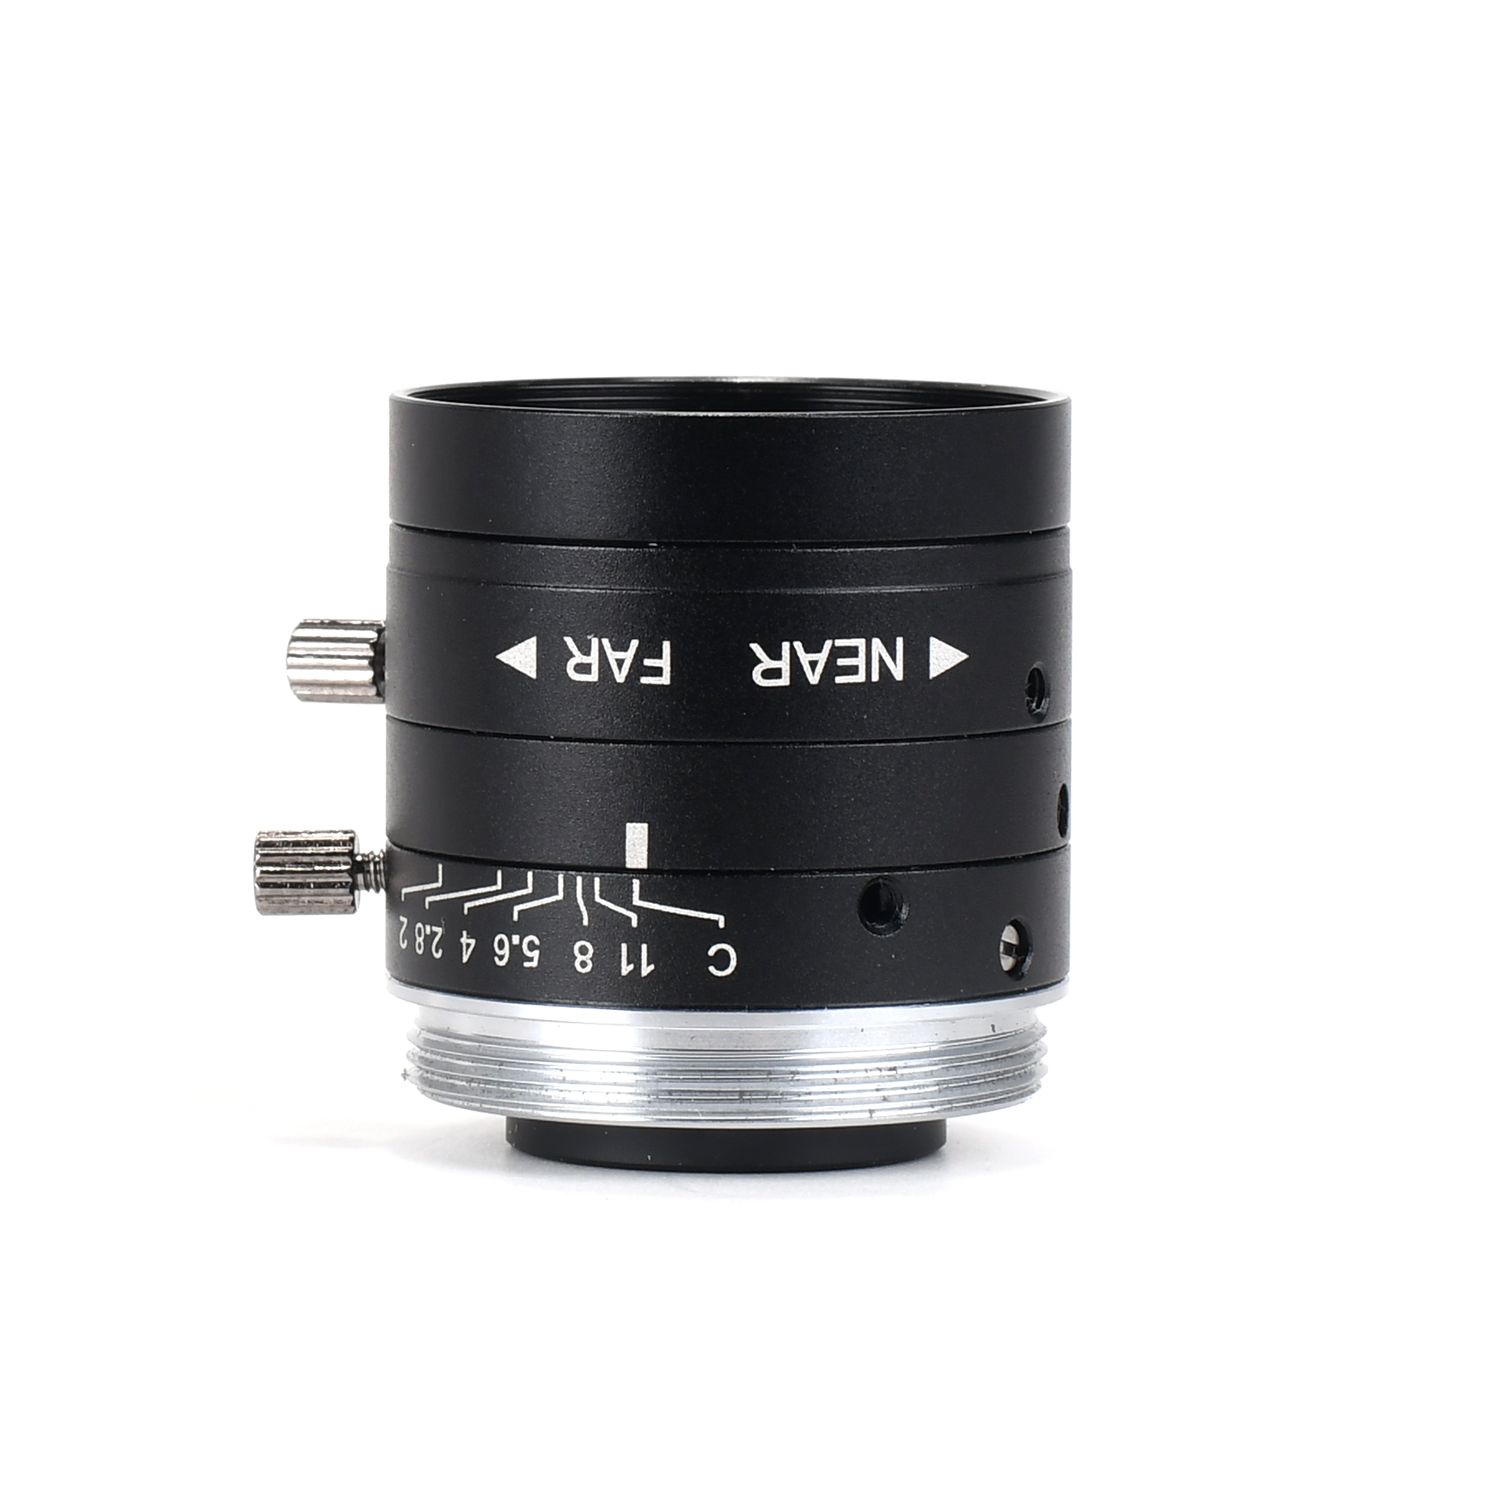 High Definition FA 6mm 1/1.8" Machine Vision Lens Without Distortion Professional C-Mouth Industrial Camera lens